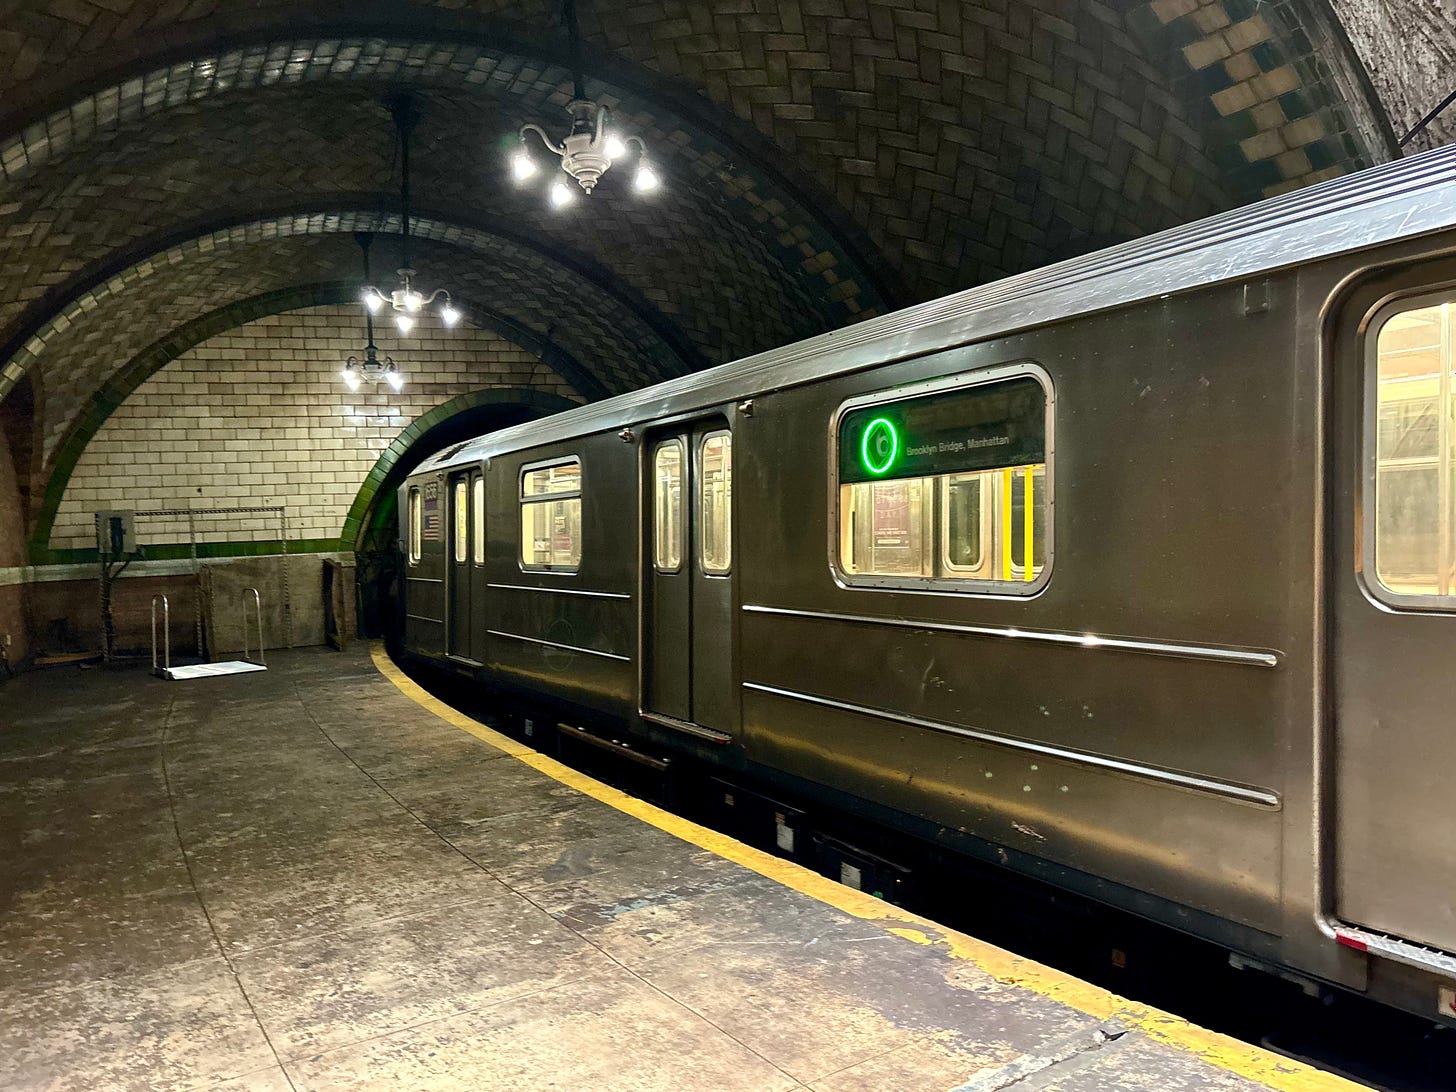 A 6 Train pulled into the station. The curve of the platform means there is a foot to two-foot gap between the platform and the doors. To the side there is what looks like the handles from a diving board on a white piece of plastic.